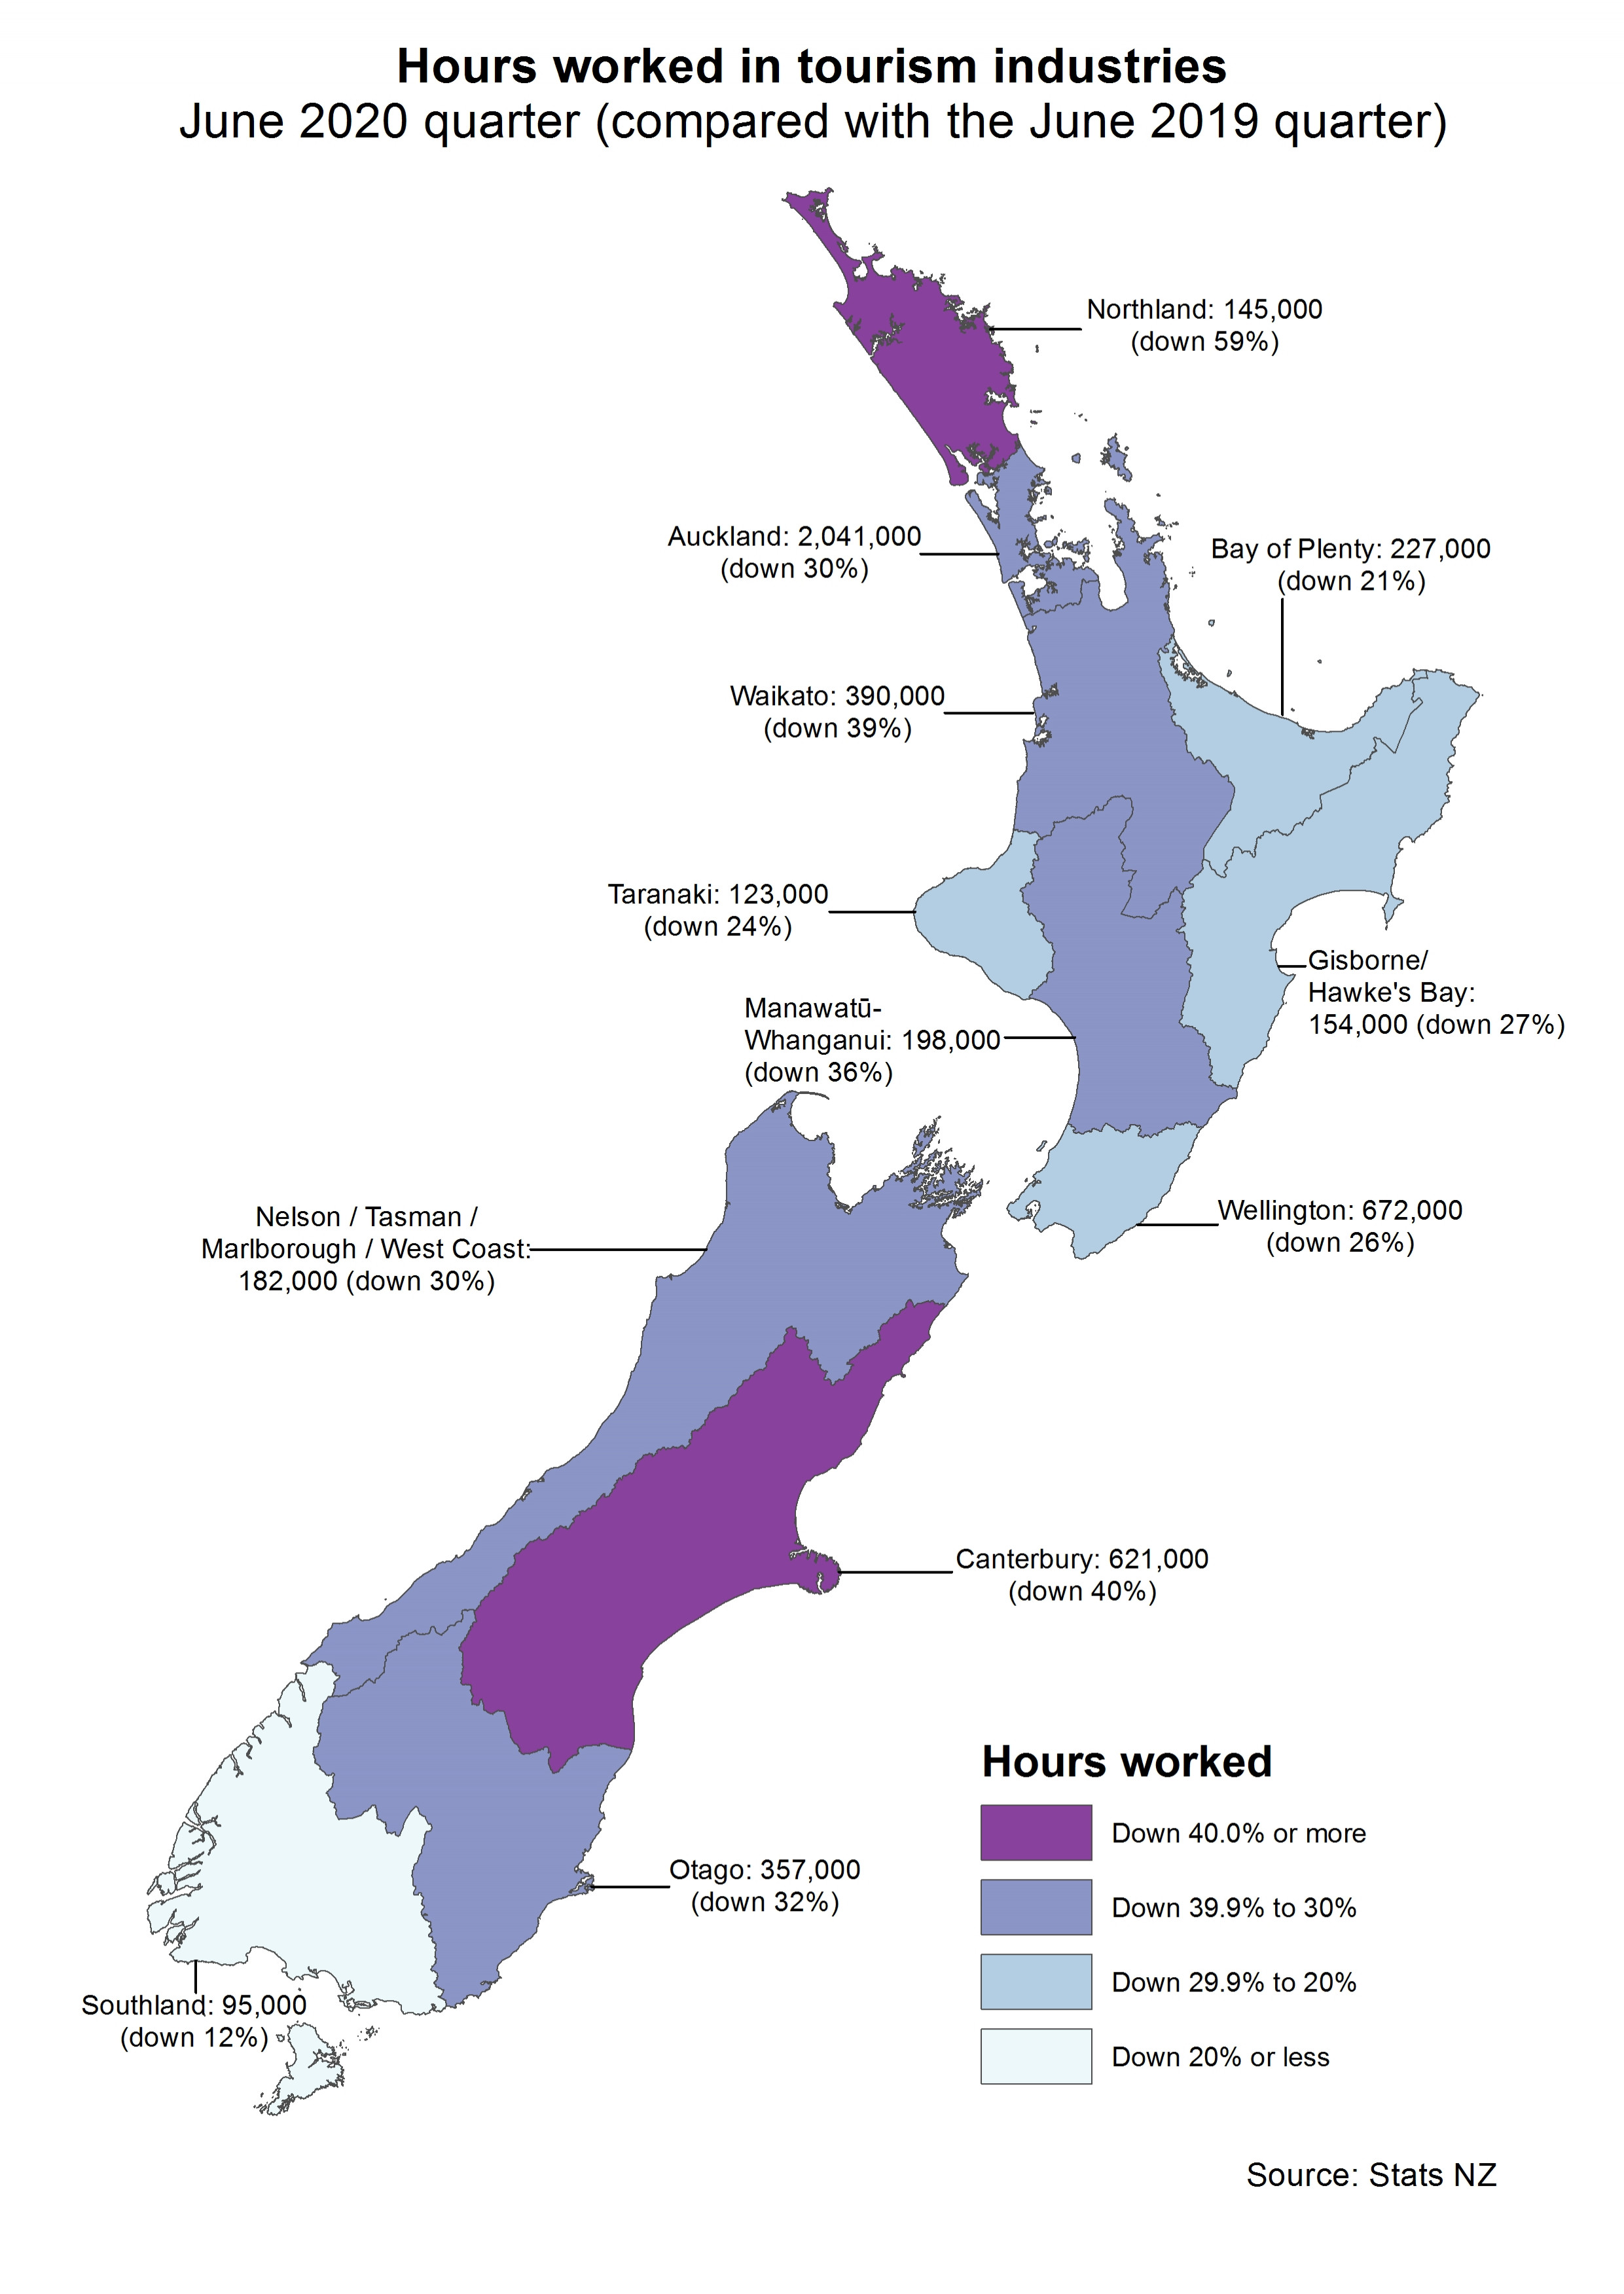 Image is of a New Zealand map, colour coded by region based on the following variables for people employed in key tourism industries. Link to text alternative at bottom of image.